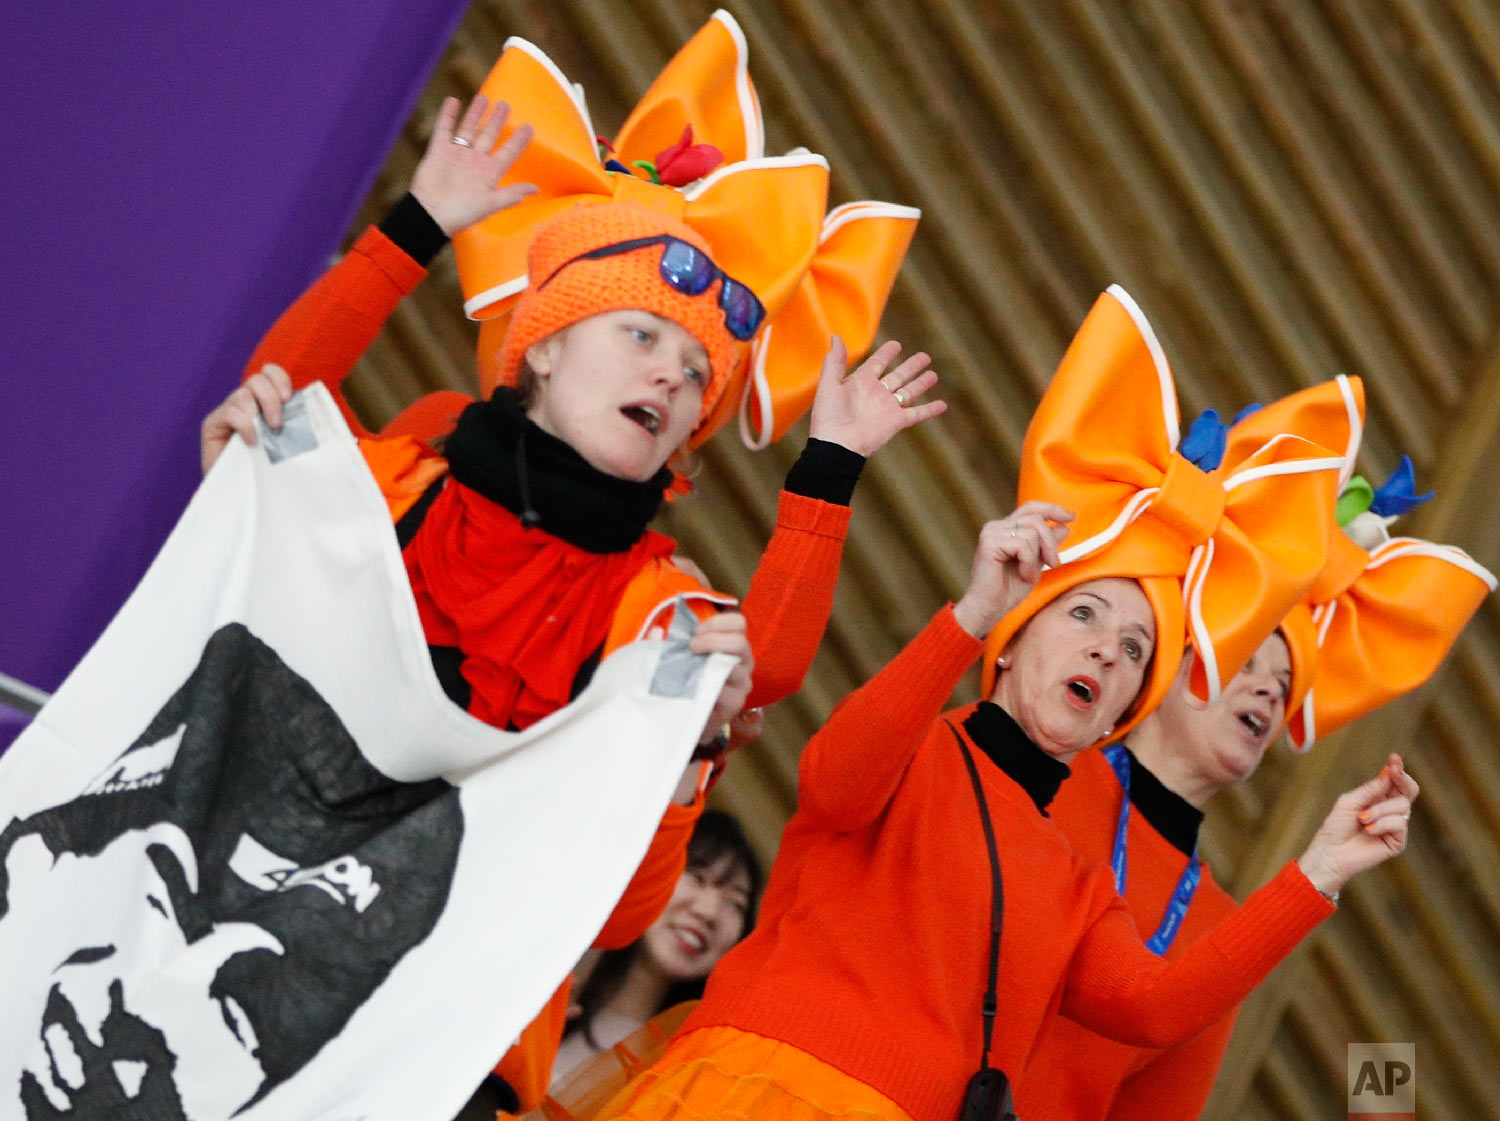  Fans clad in the colors of the Netherlands team hold a flag with the face of speed skater Sven Kramer of The Netherlands prior to the men's 5,000 meters race at the Gangneung Oval at the 2018 Winter Olympics in Gangneung, South Korea, Sunday, Feb. 1